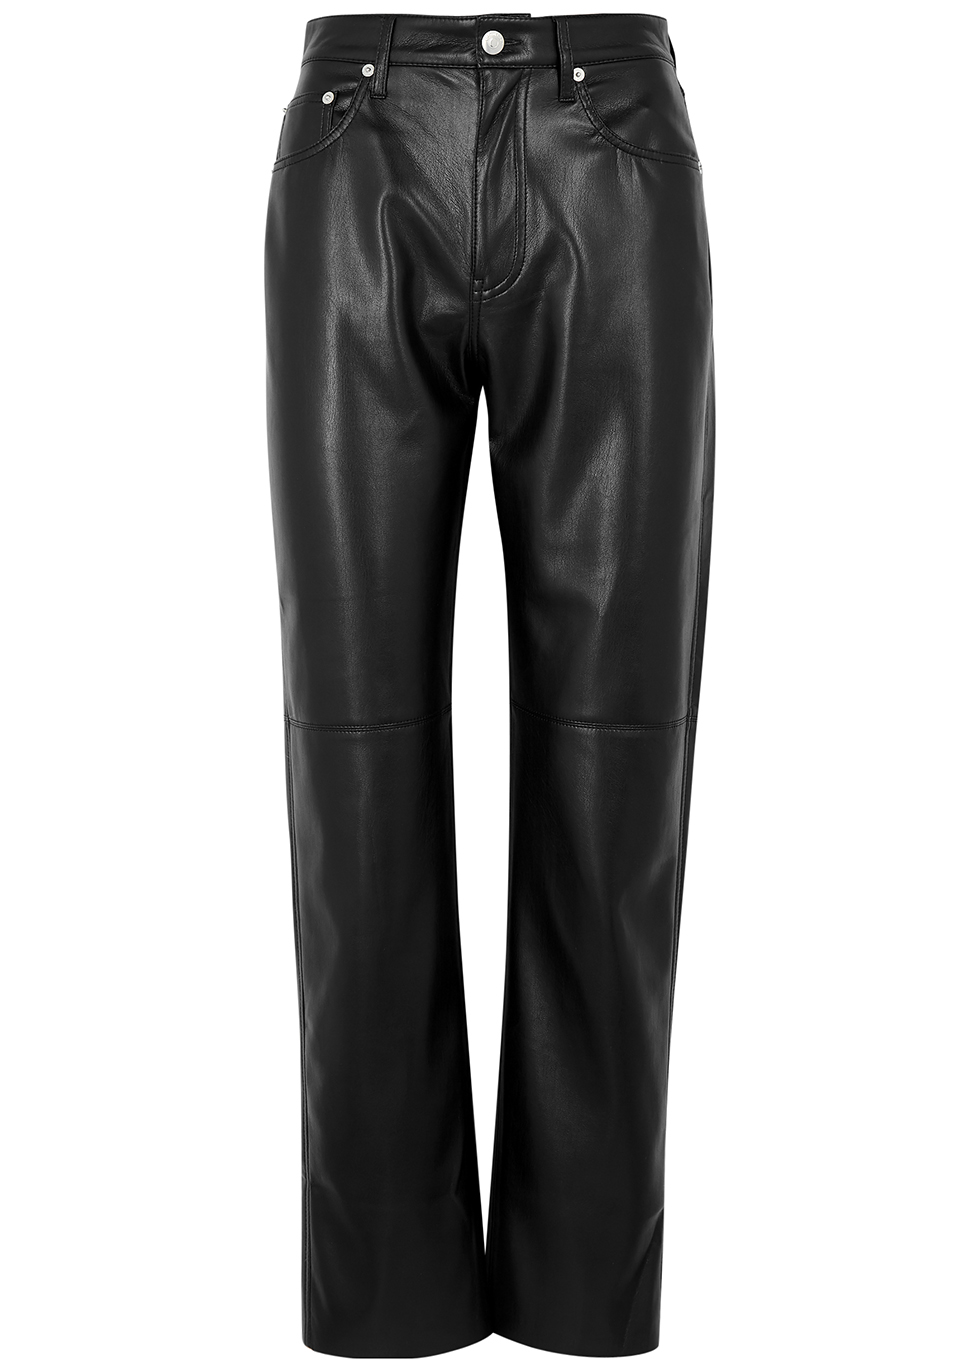 Womens Real Leather High Waisted Trousers Pants